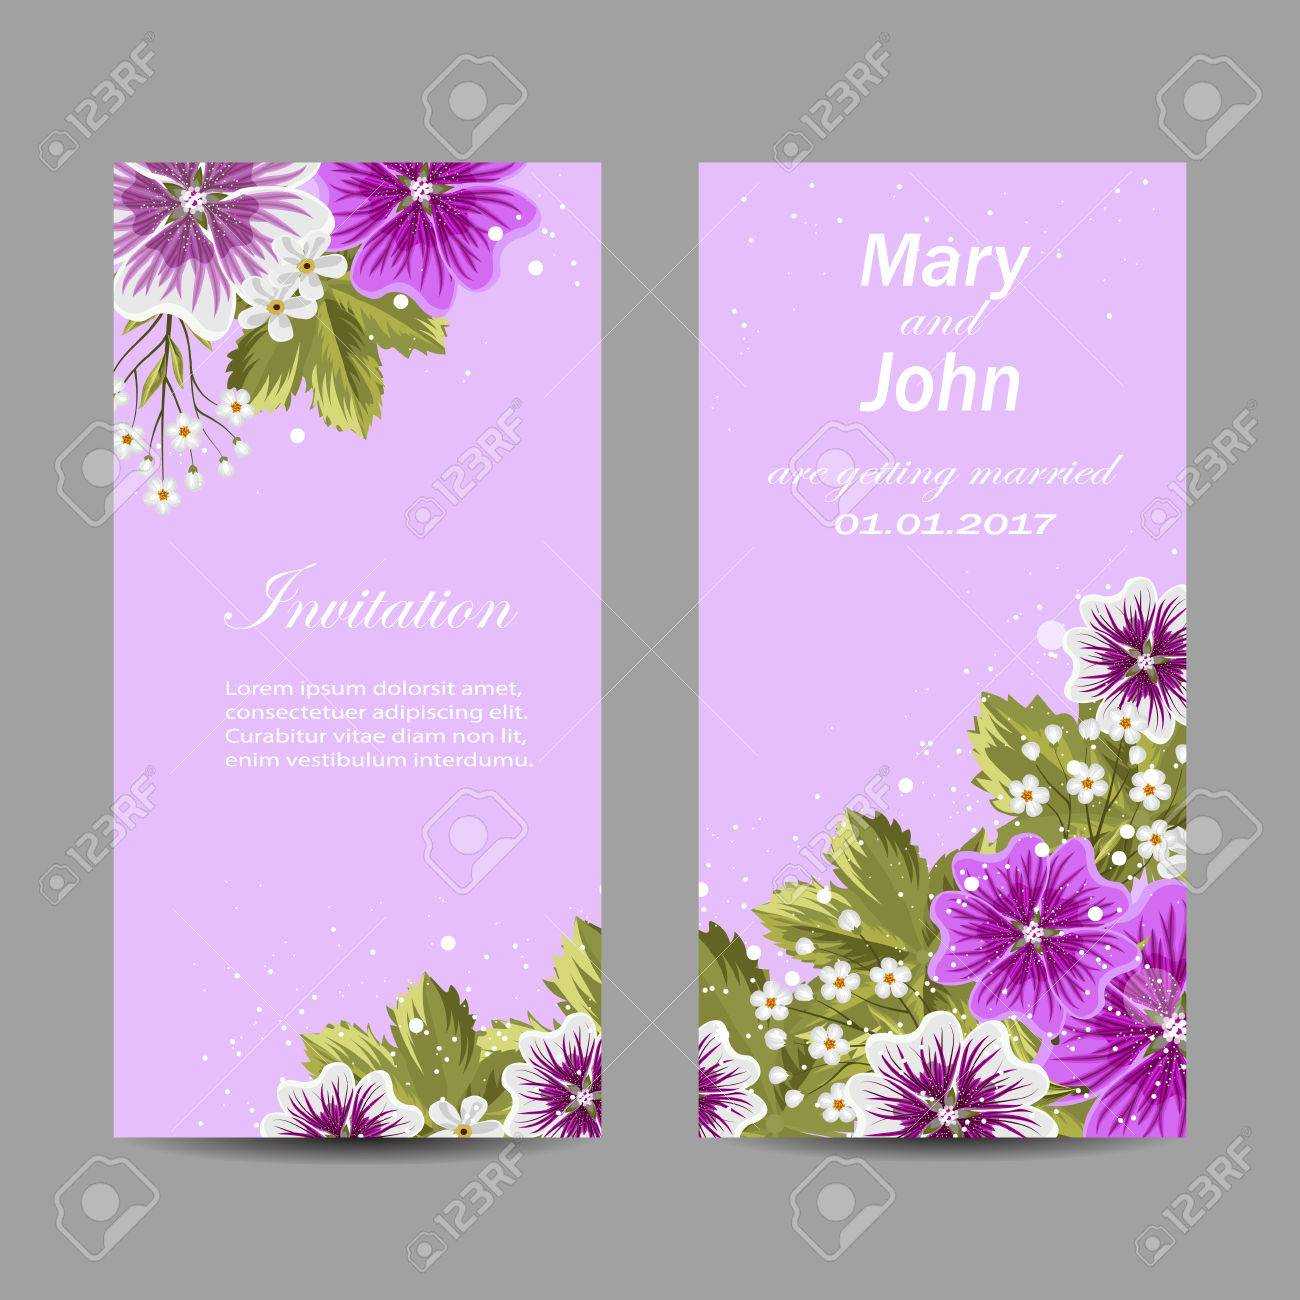 Set Of Wedding Invitation Cards Design. Beautiful Mallow Flowers.. Intended For Invitation Cards Templates For Marriage